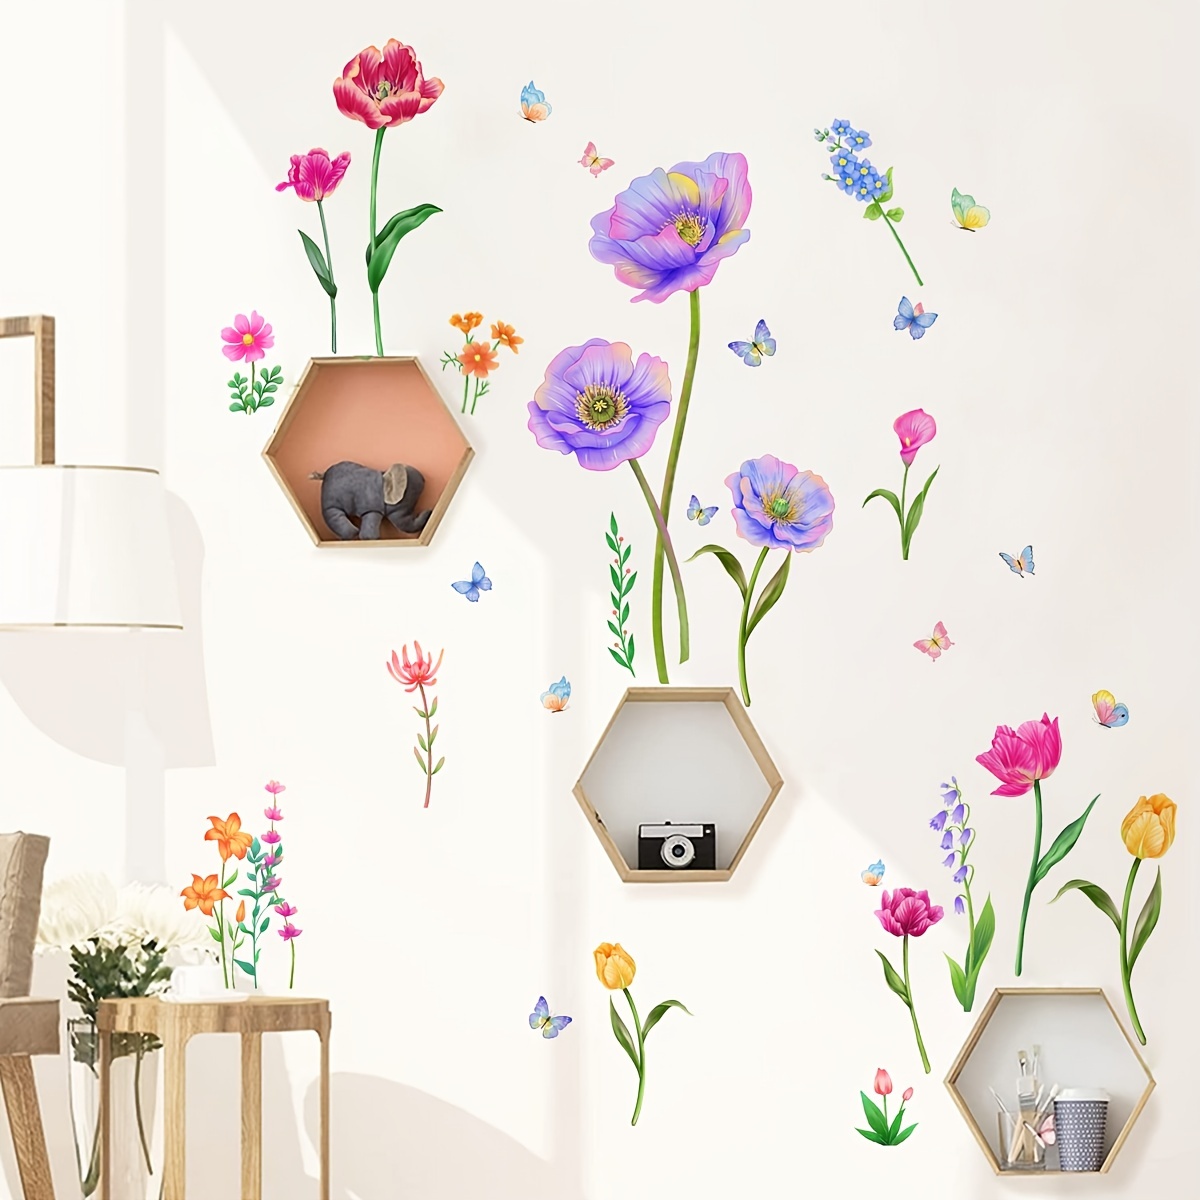 Flowers Wall Stickers - Removable Wall Decals